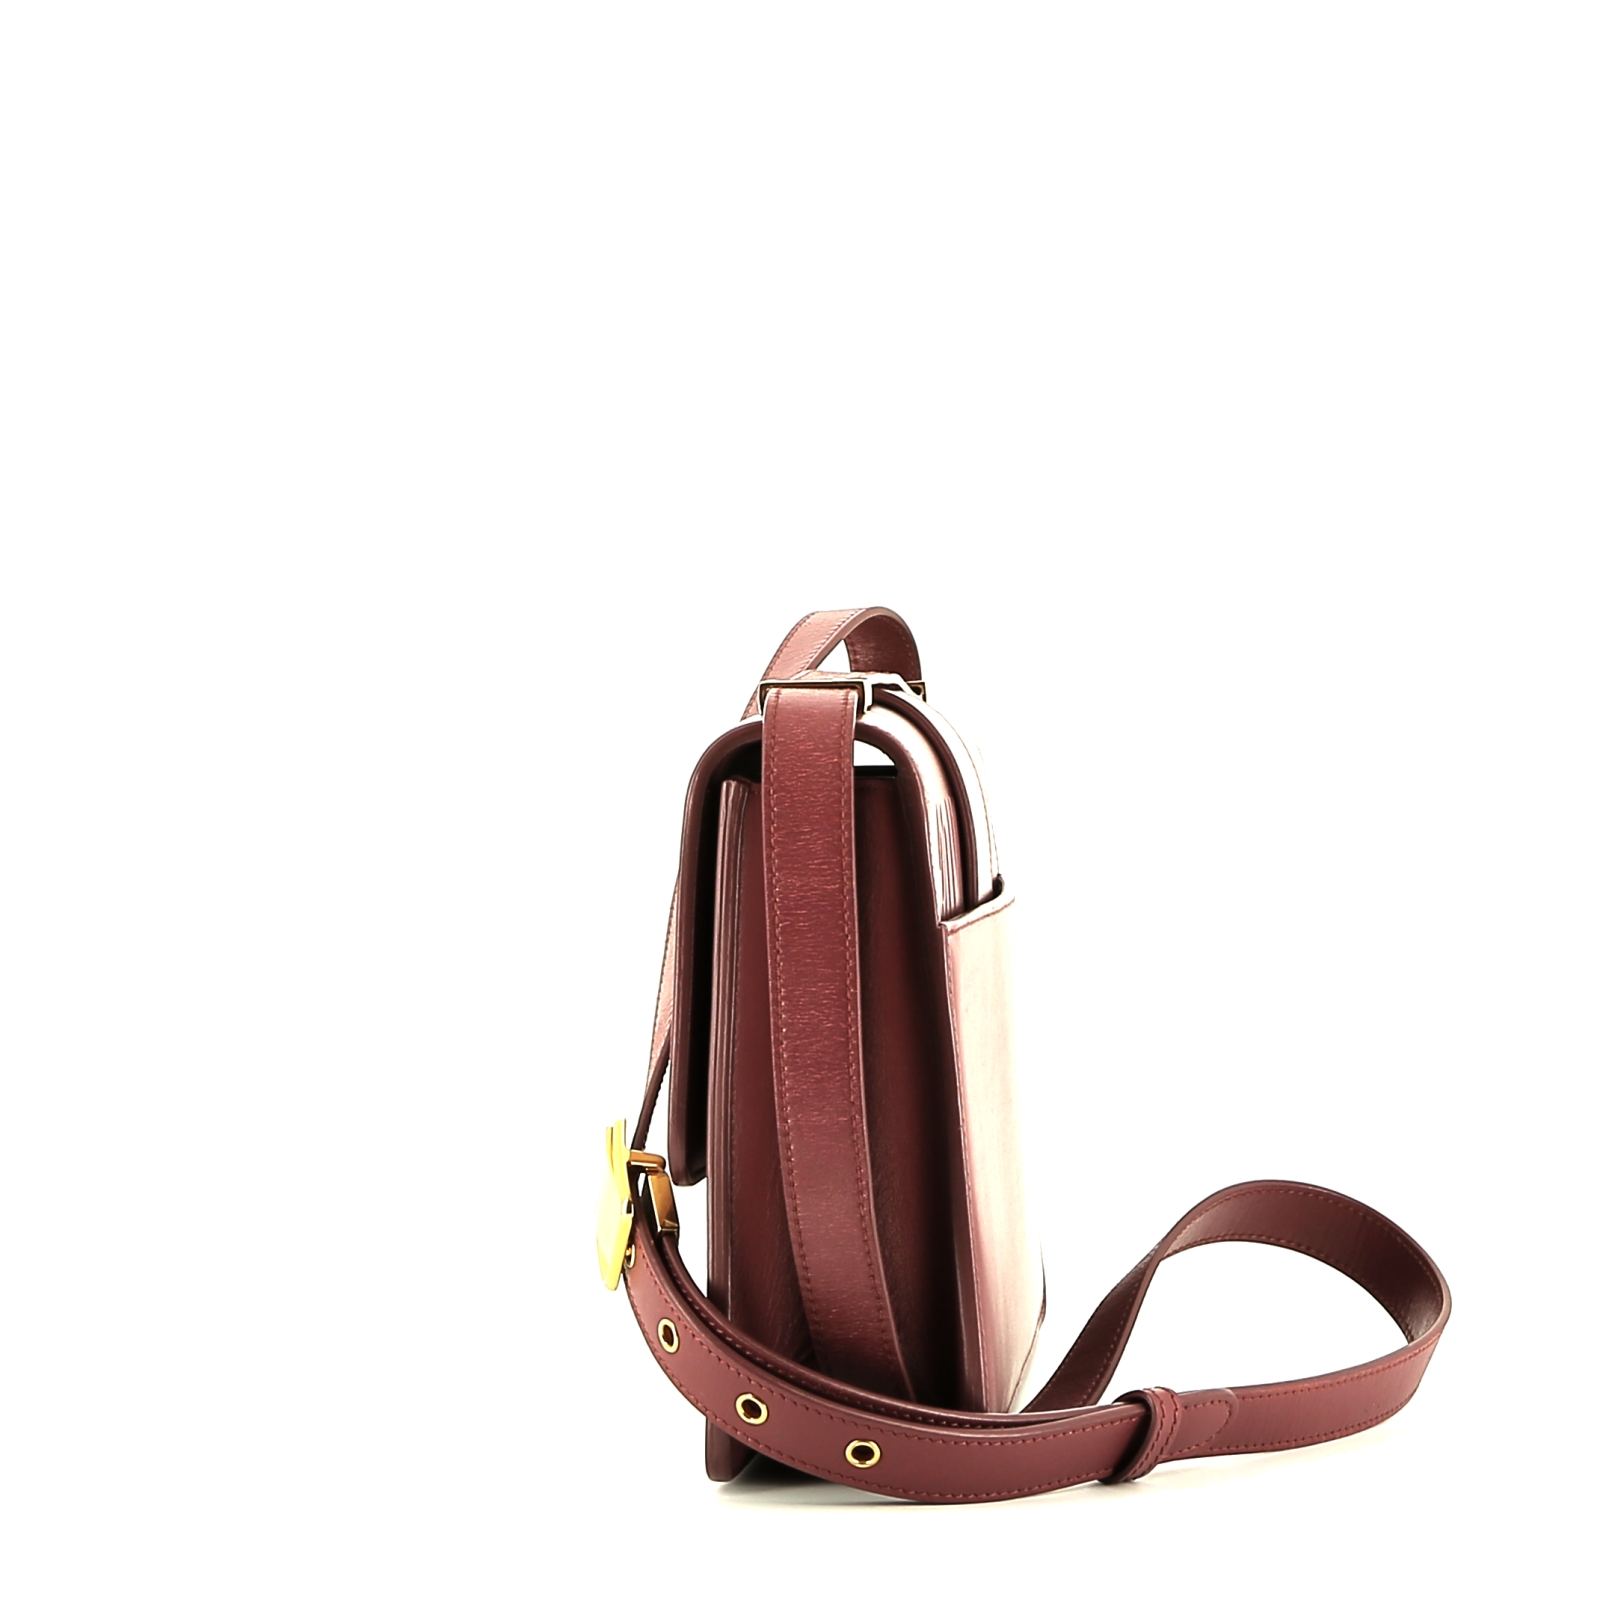 30 Montaigne Shoulder Bag In Pink Grained Leather